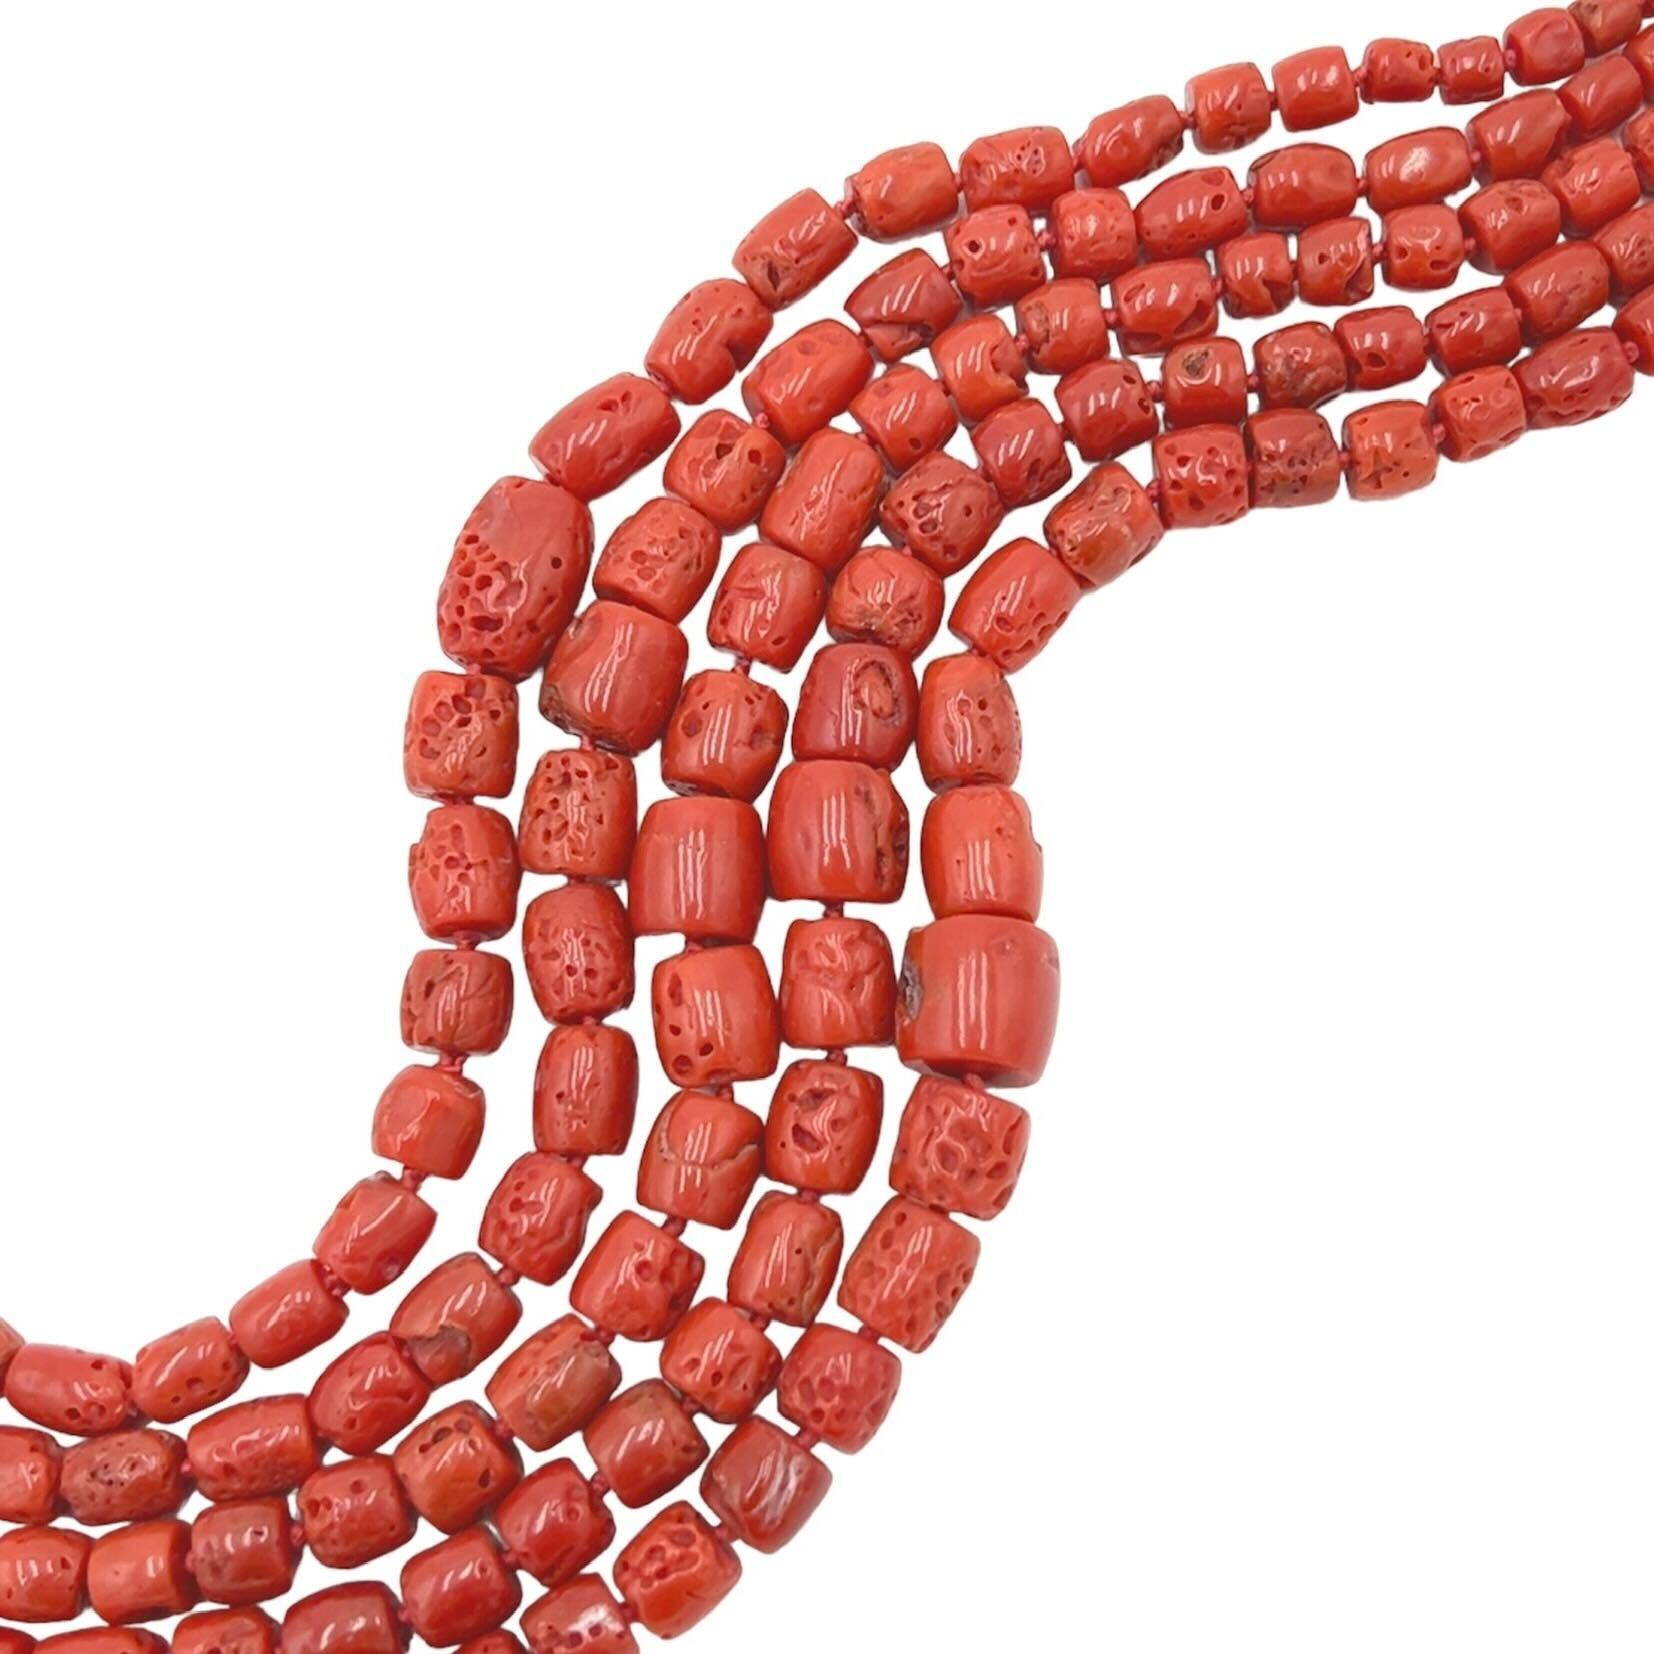 An 18 karat yellow gold and coral bead necklace, Paloma Picasso, Tiffany & Co.  Designed as five (5) nested strands of graduated barrel shaped sponge coral beads completed by a clasp of interlocking circles.  Length approximately 20 inches.  Gross